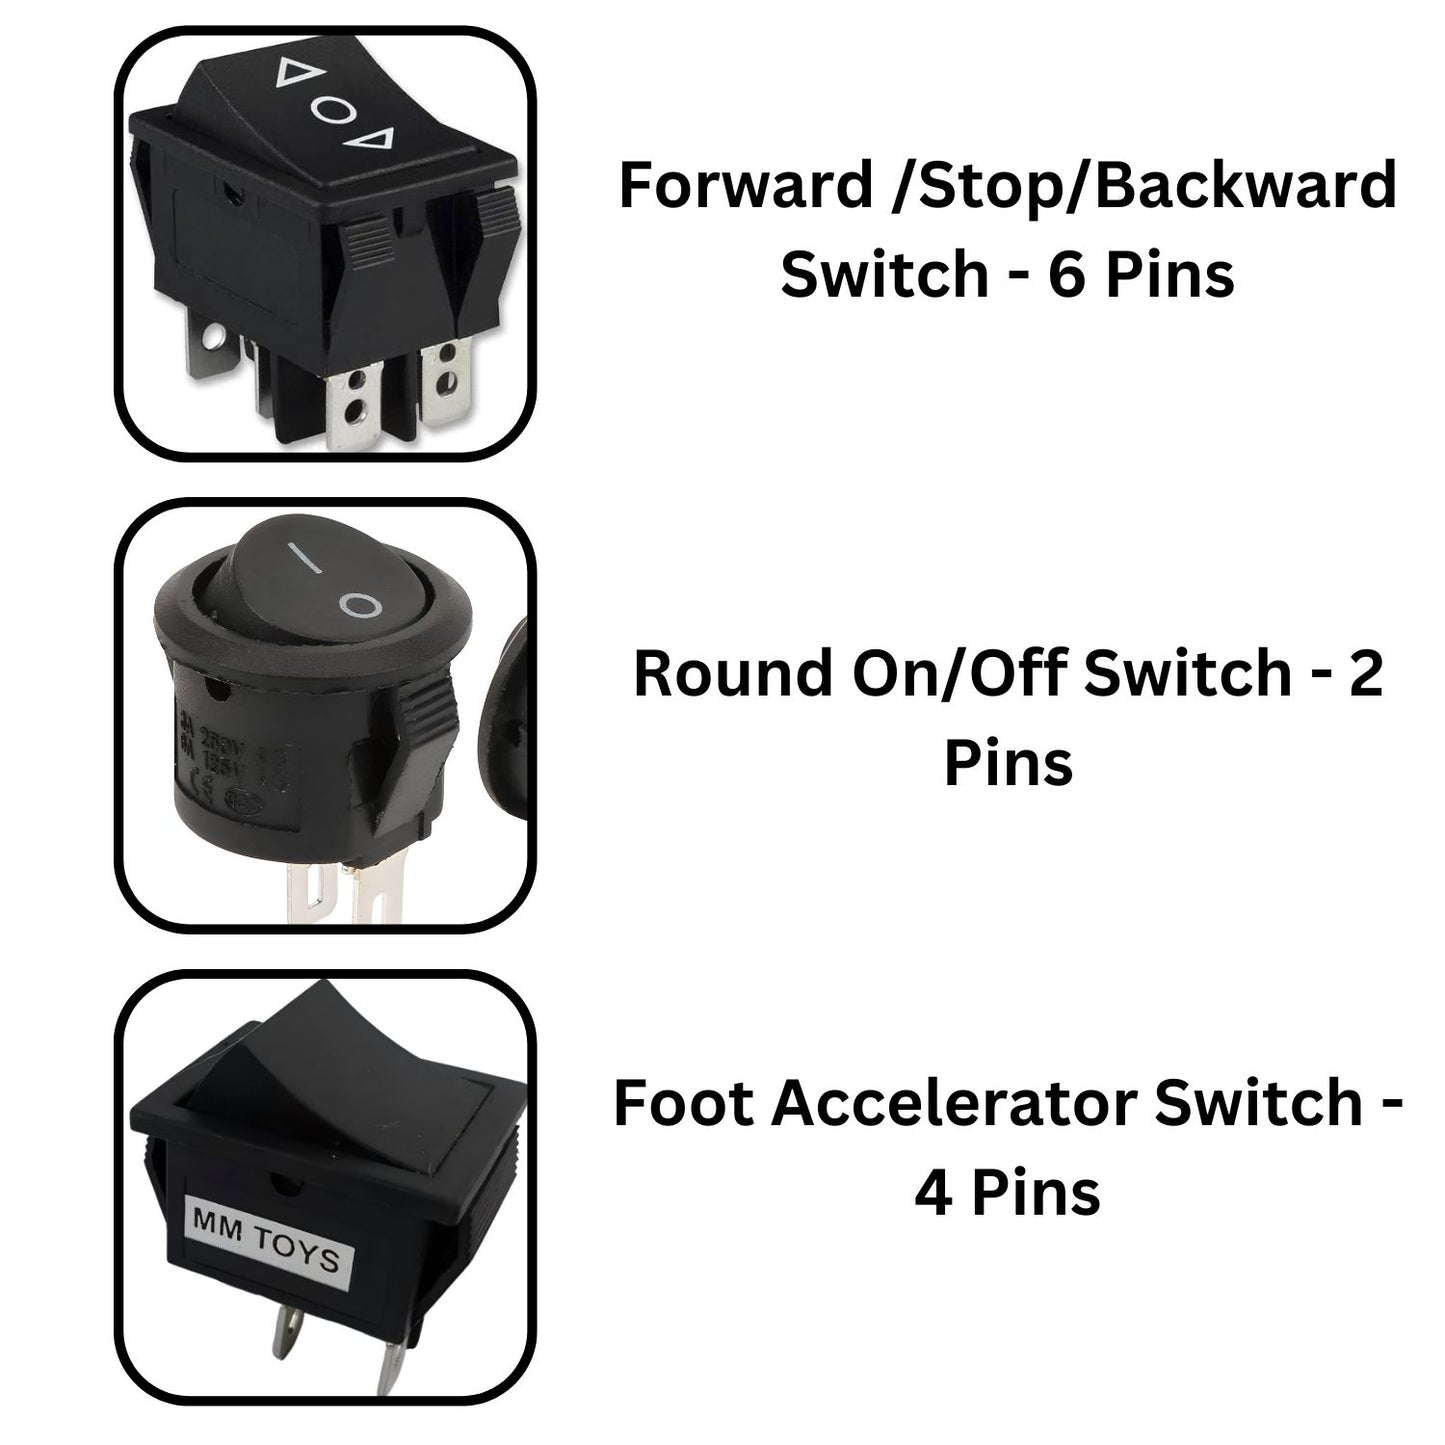 MM TOYS 3-in-1 Switch Combo Pack - 4 Pin Foot Switch, 6 Pin Forward/Stop/Backward, 2 Pin Power On-Off Round Rocker Type- Complete Repair Switch Kit For kids Electric Bike( Pack of 3 Pcs )- Black